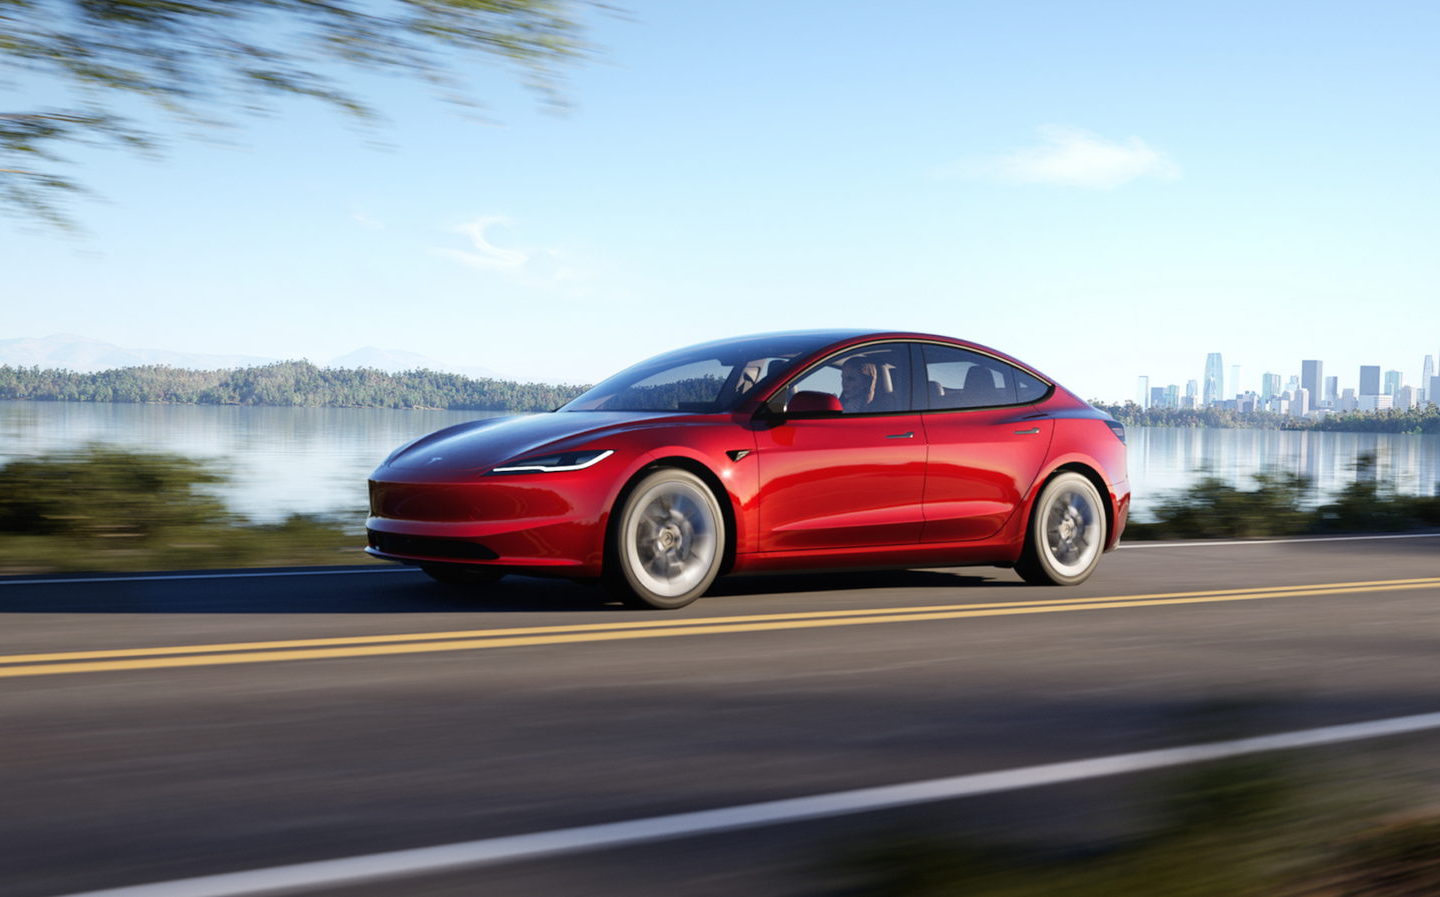 electric car, model 3, tesla, new tesla model 3 goes further on a charge, gets higher-quality cabin and new technology